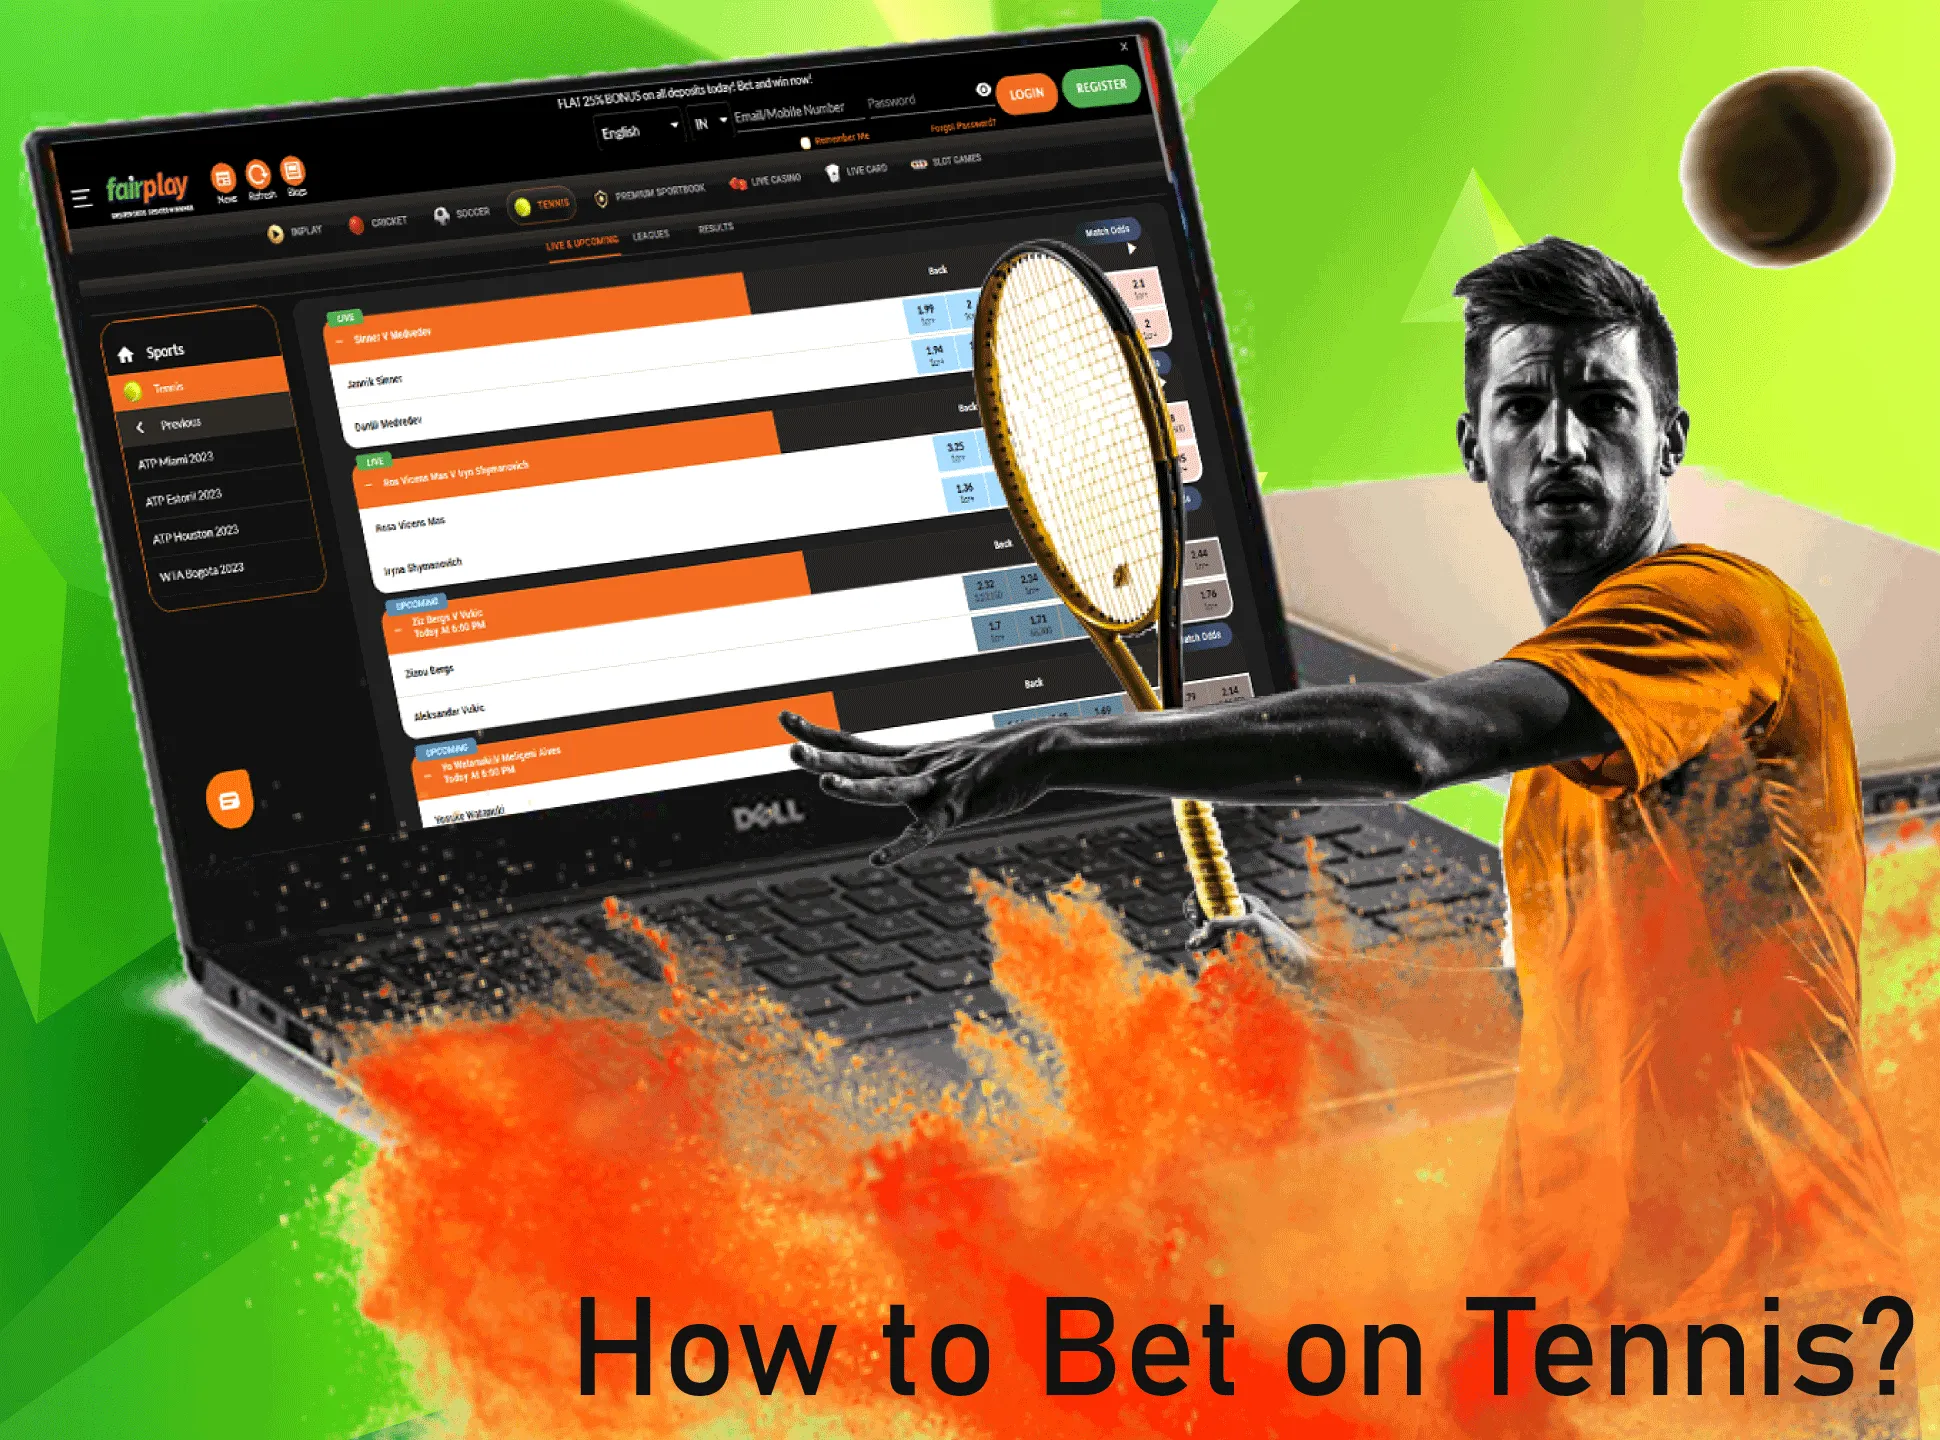 To start betting on tennis you should register on Fairplay and top up your account.